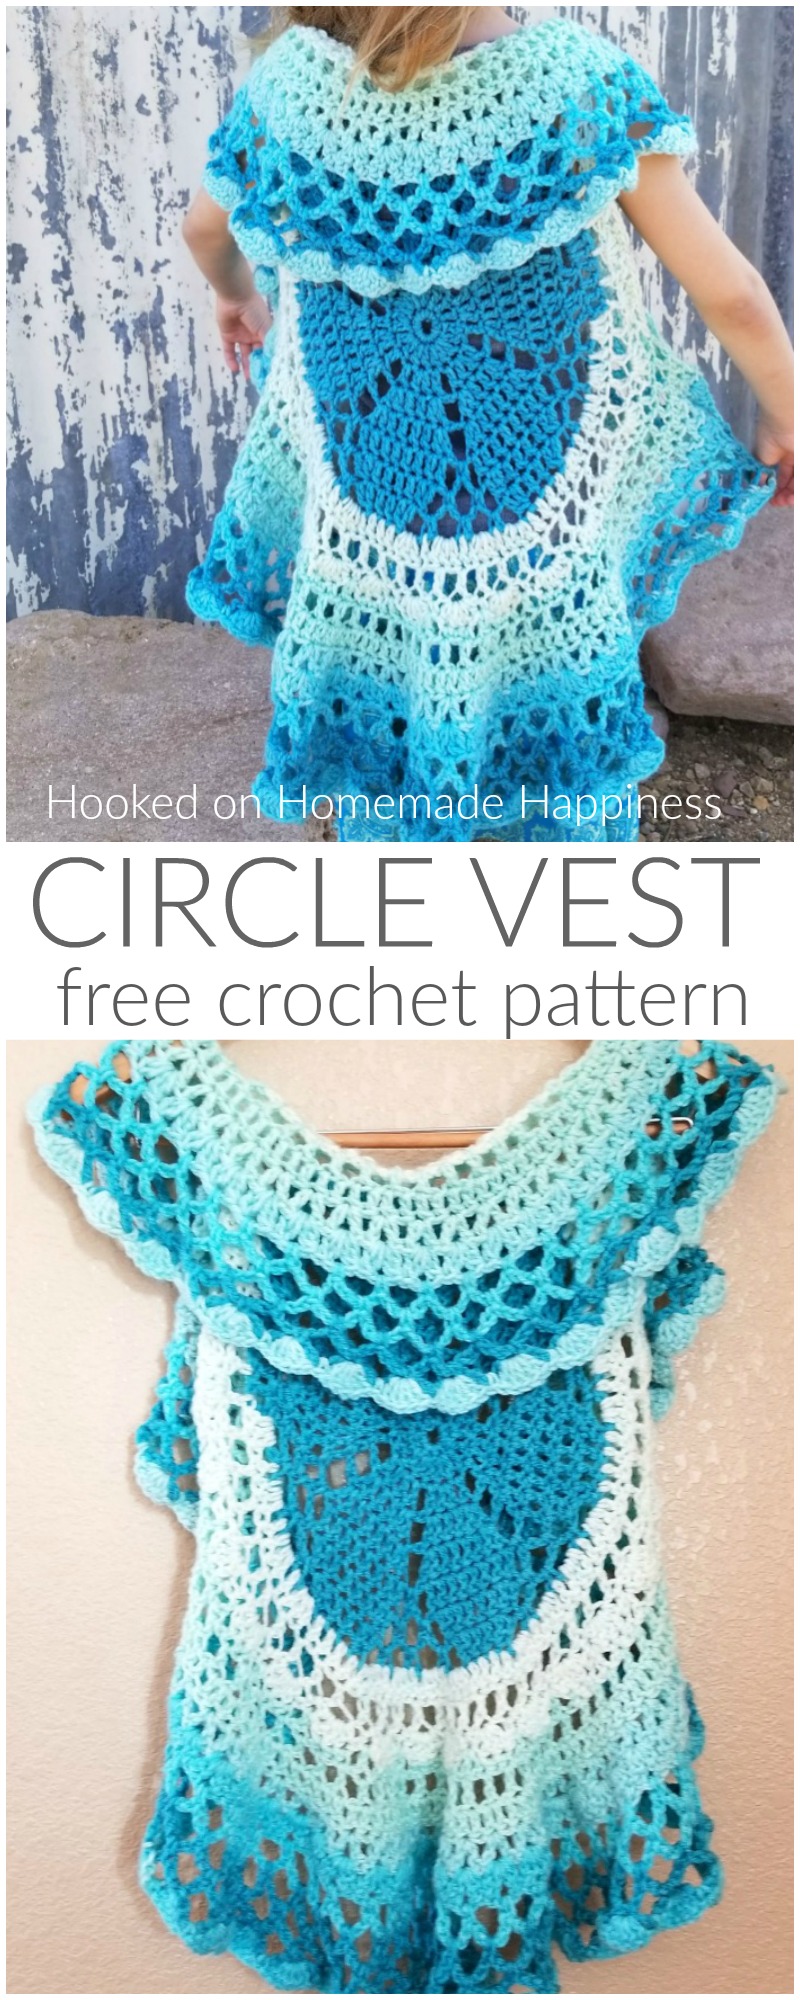 Crochet Circle Vest - I love circle vests! They're such a fun accessory. For this Crochet Circle Vest Pattern I wanted to use a Caron Cake. Because who doesn't love stripes without weaving in all the ends, amiright?